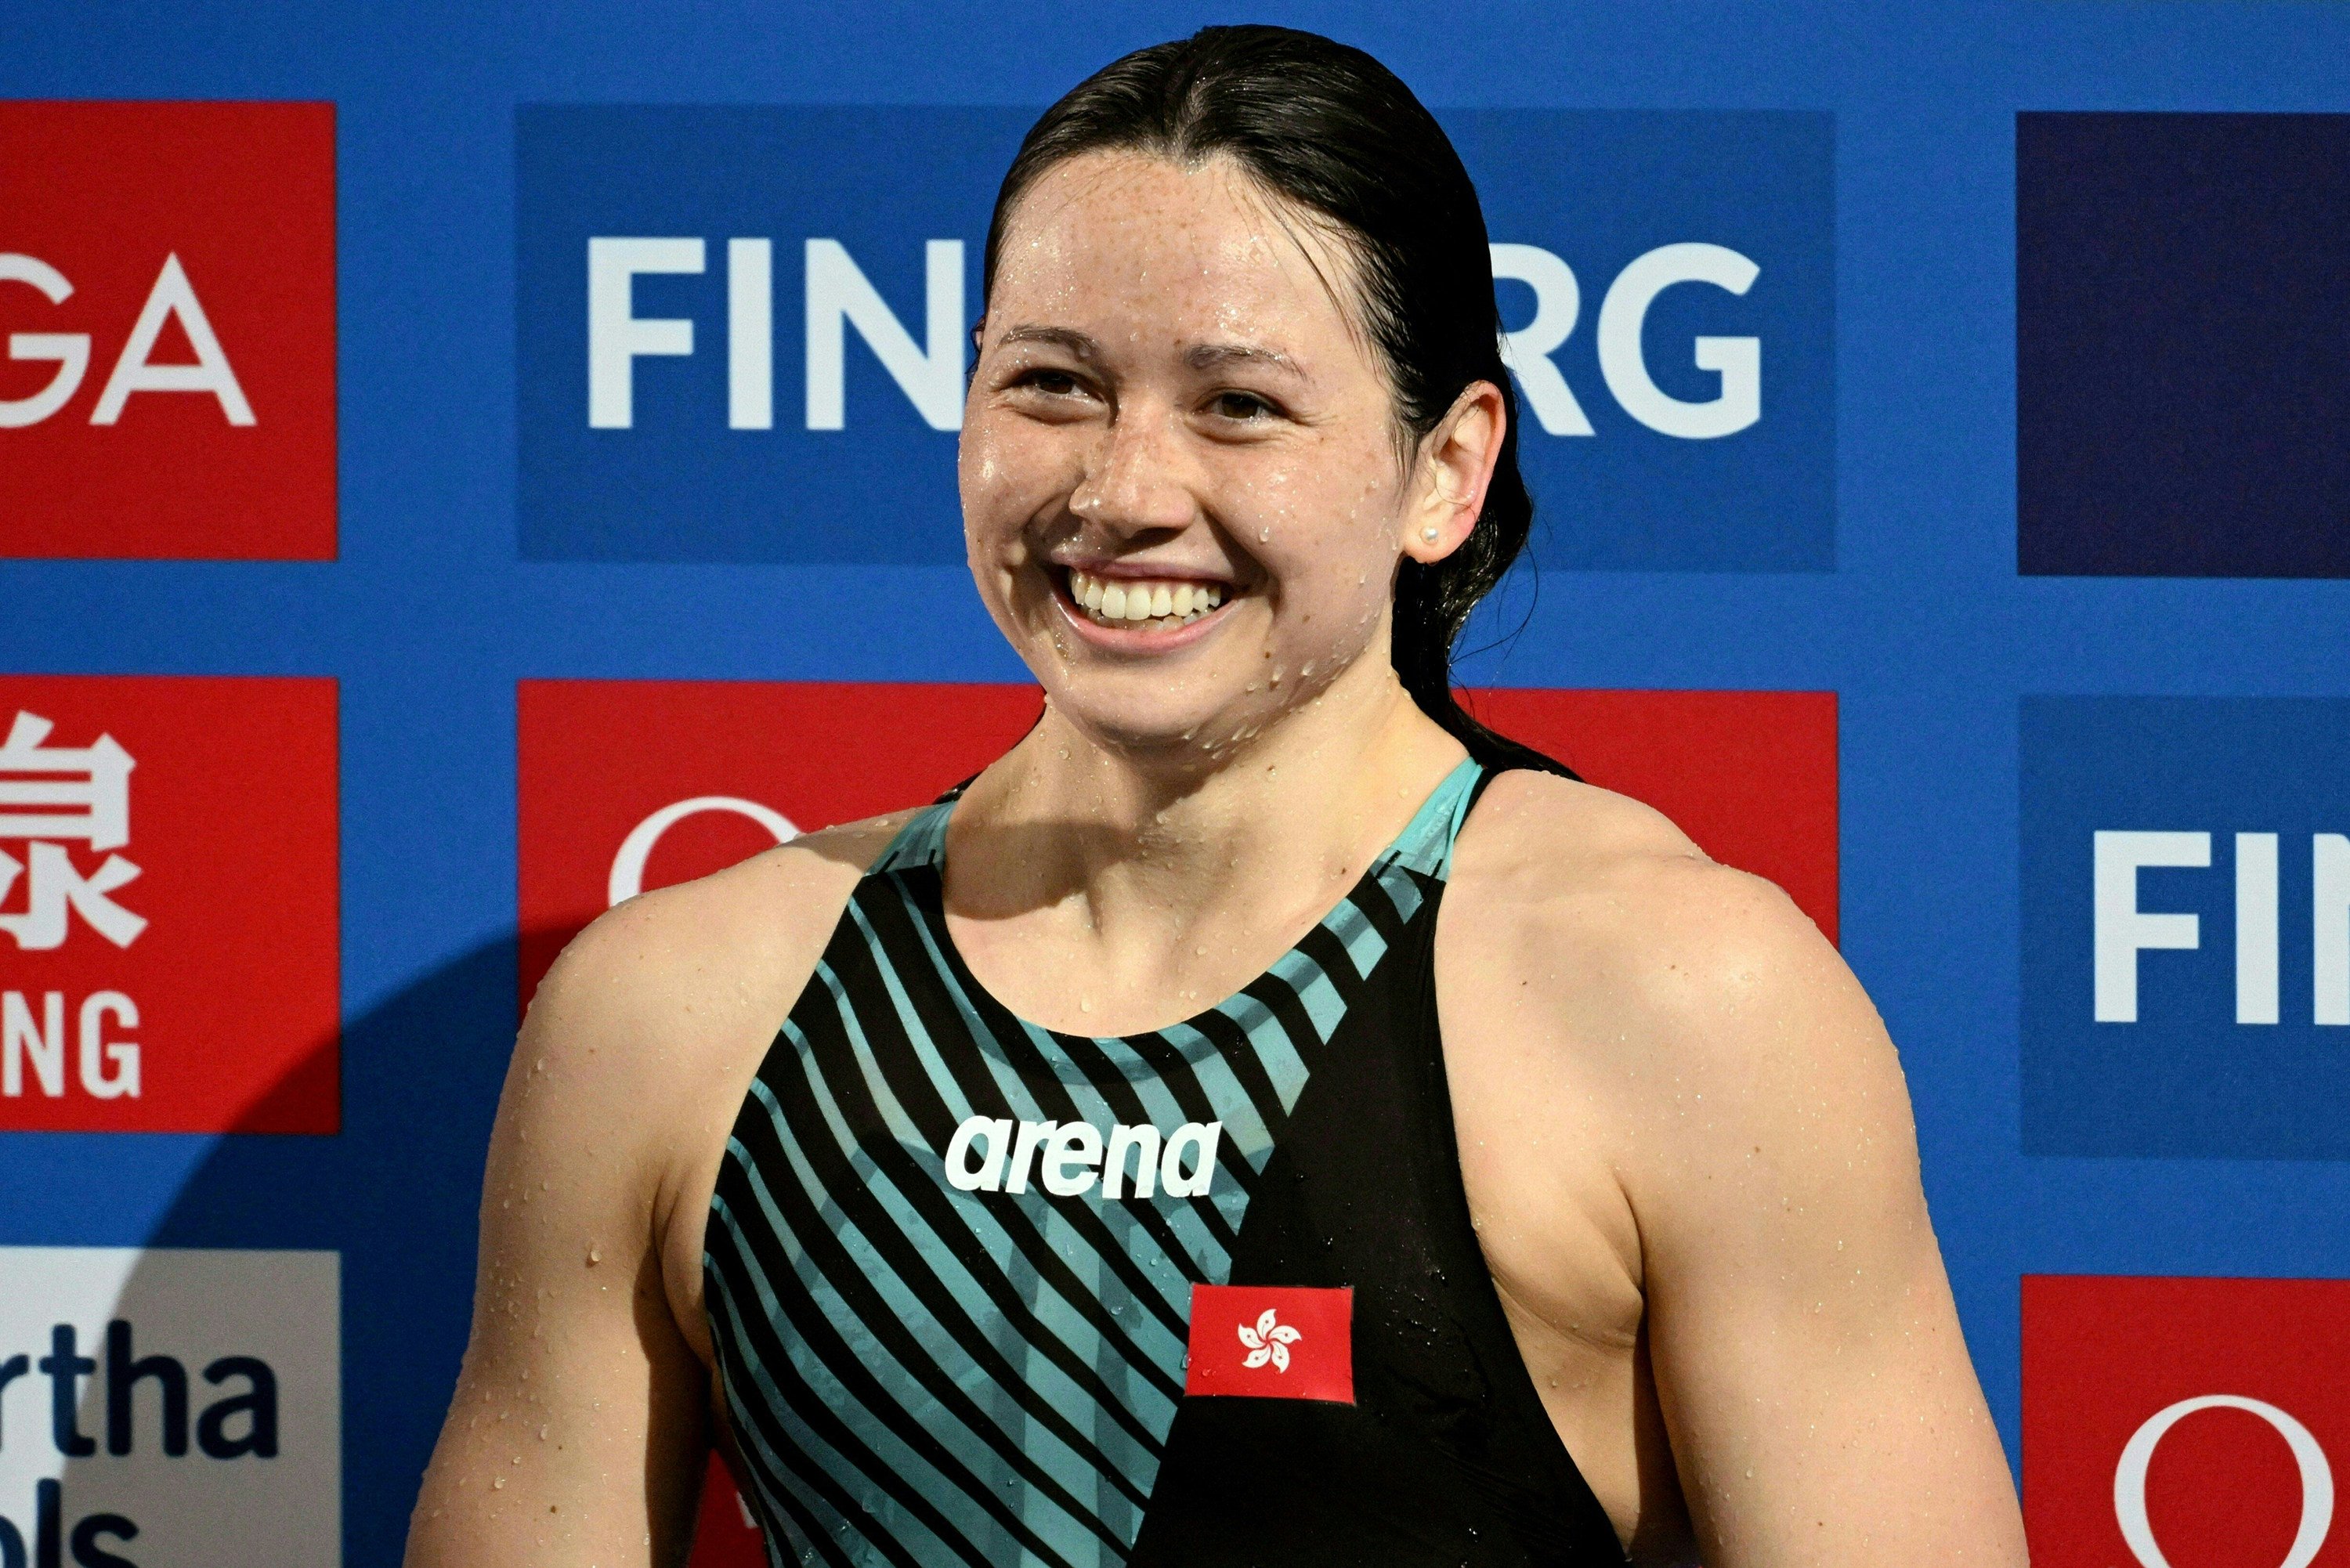 Siobhan Haughey has set a new Hong Kong record and qualified for the Paris Olympics in the 50m freestyle. Phoot: AFP